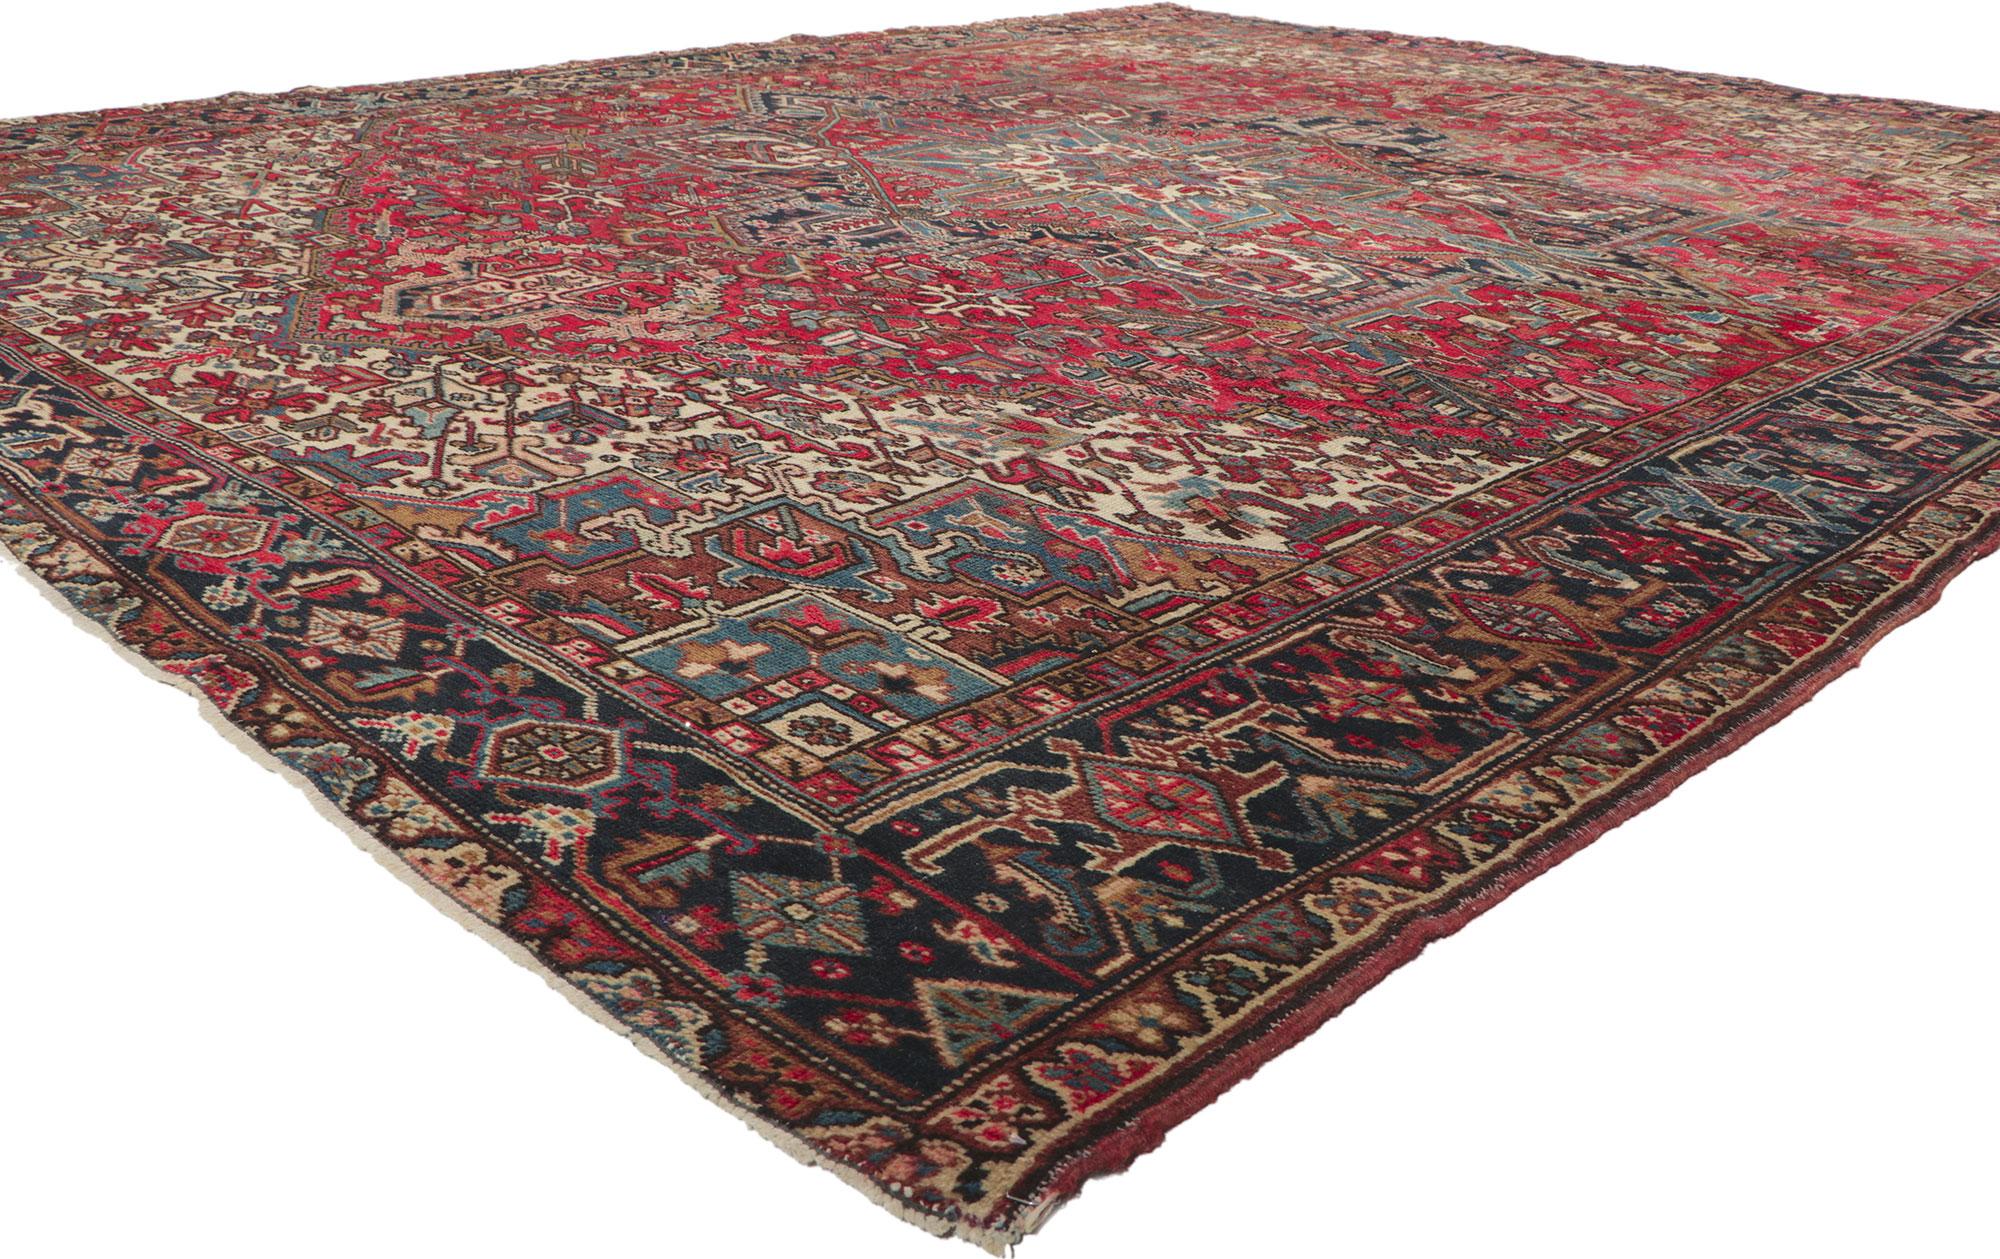 ?78349 Vintage Persian Heriz Rug, 09'08 x 12'02. Emanating timeless style with incredible detail and texture, this hand knotted wool vintage Persian Heriz rug is a captivating vision of woven beauty. The geometric design and sophisticated color